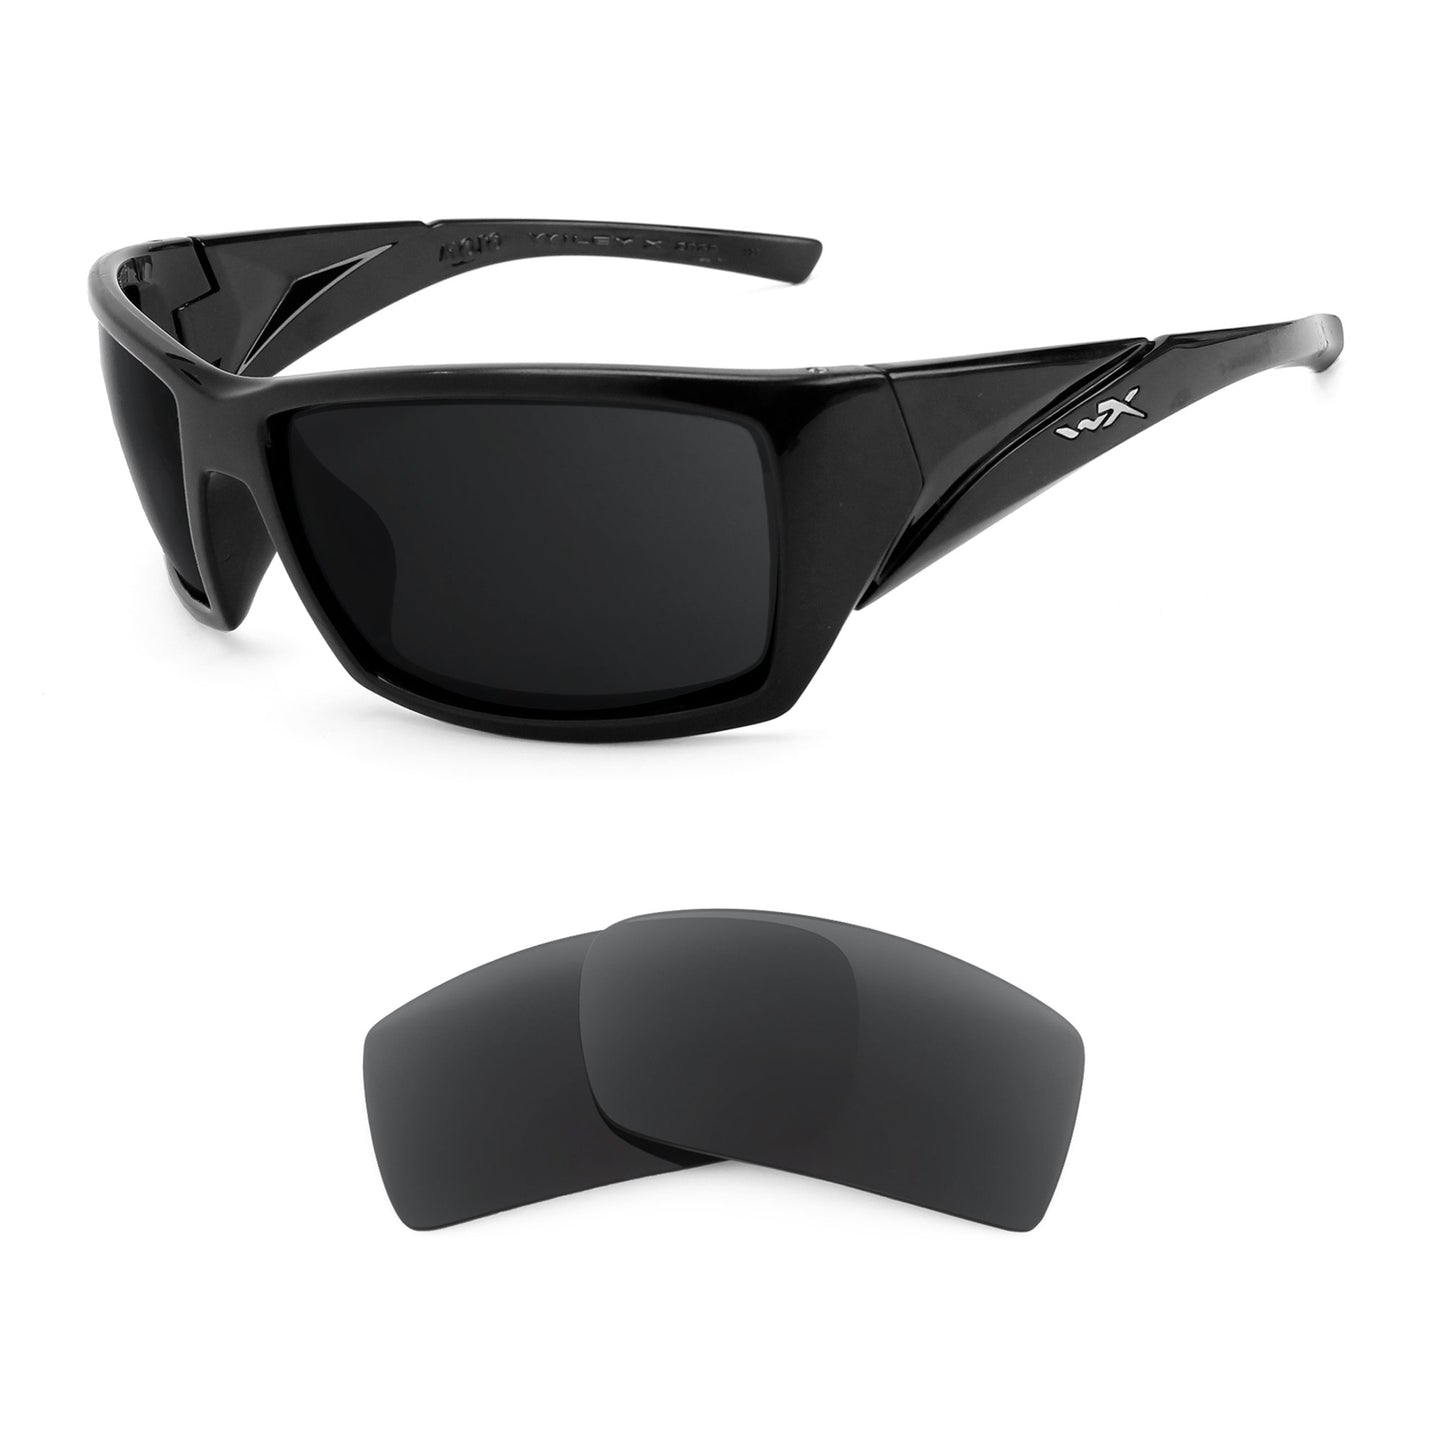 Wiley X Mojo sunglasses with replacement lenses